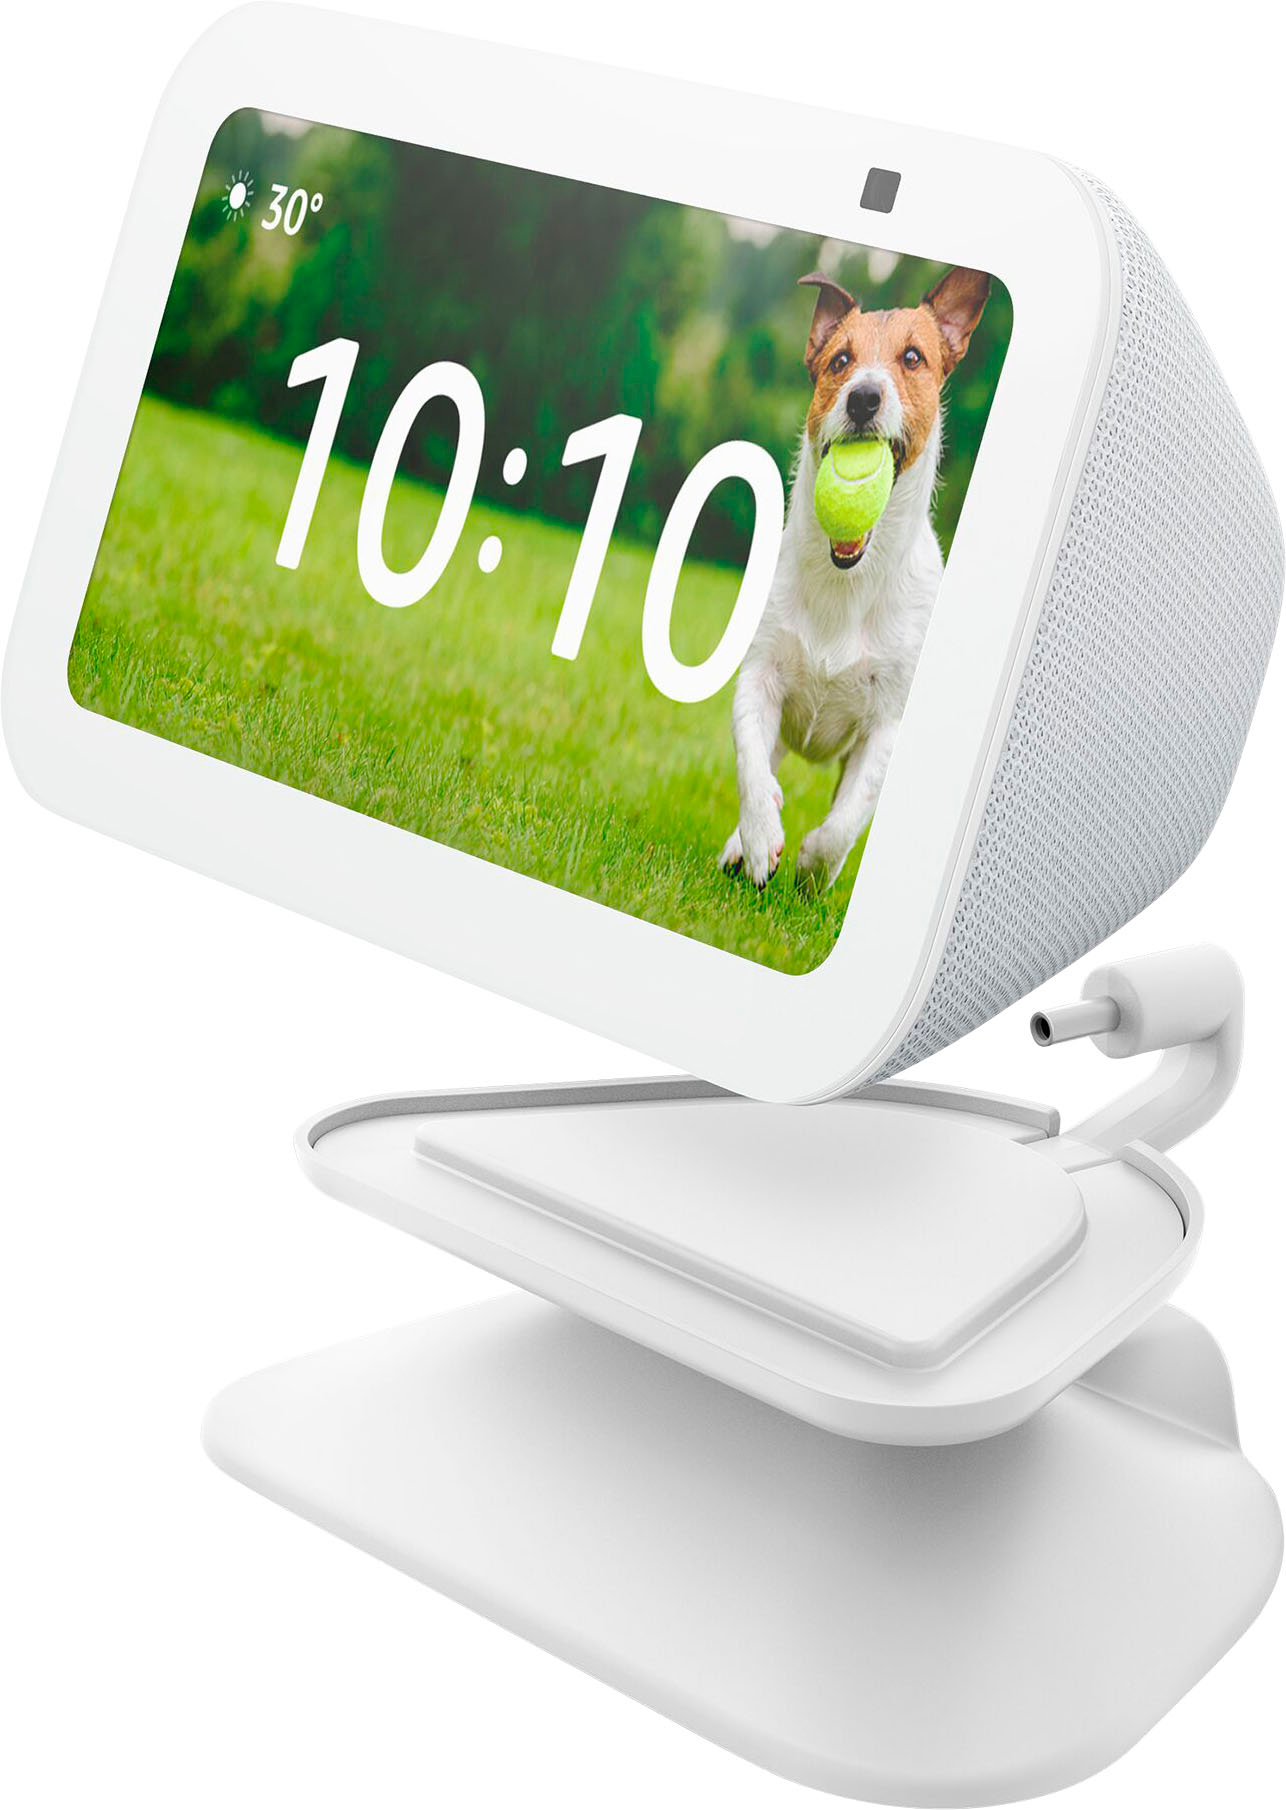 Built-in Mount for  Echo Show 5 - 1st and 2nd generation – Mount Genie